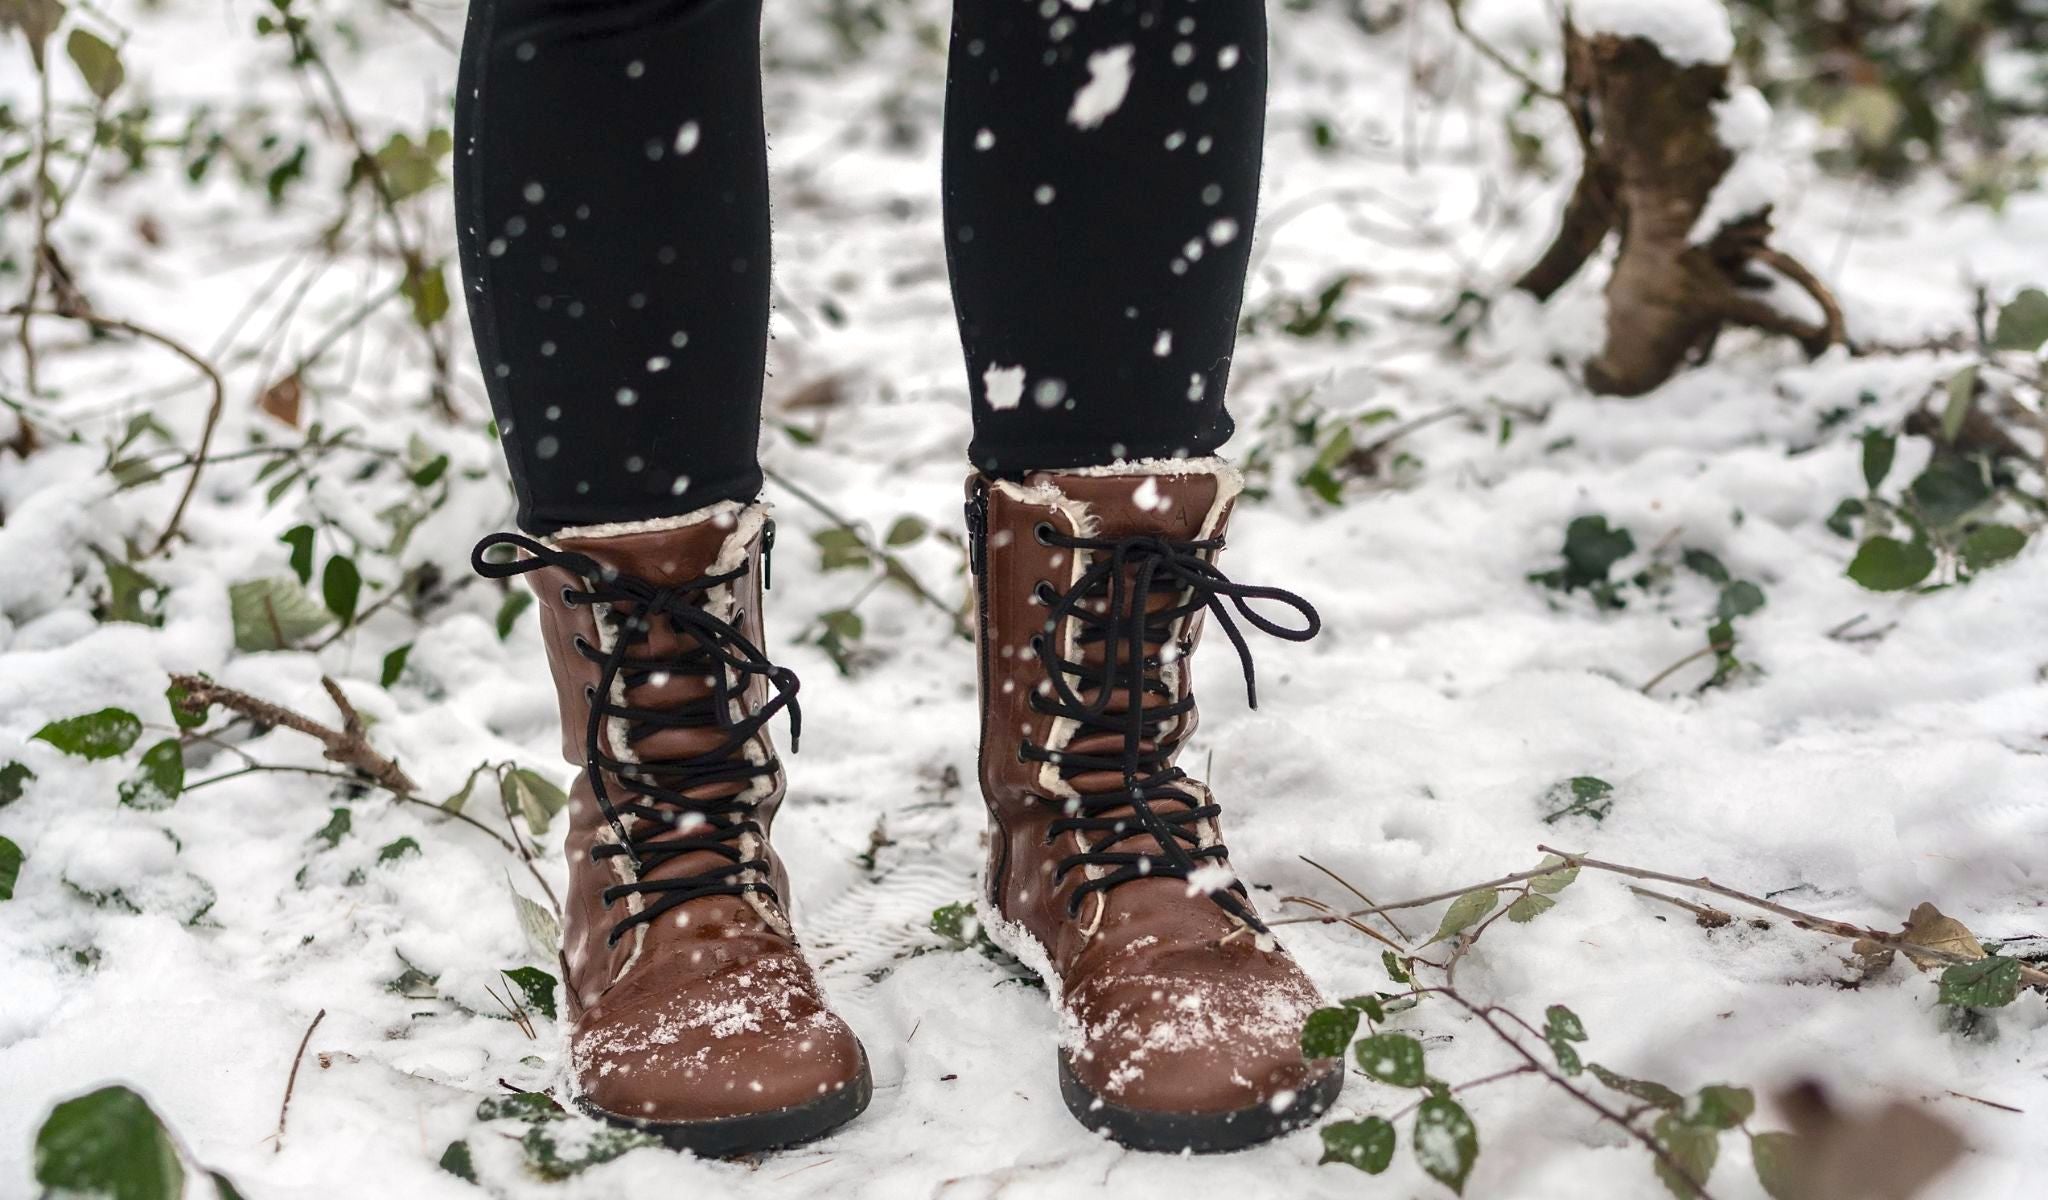 How to choose winter boots? Note: Warm and healthy